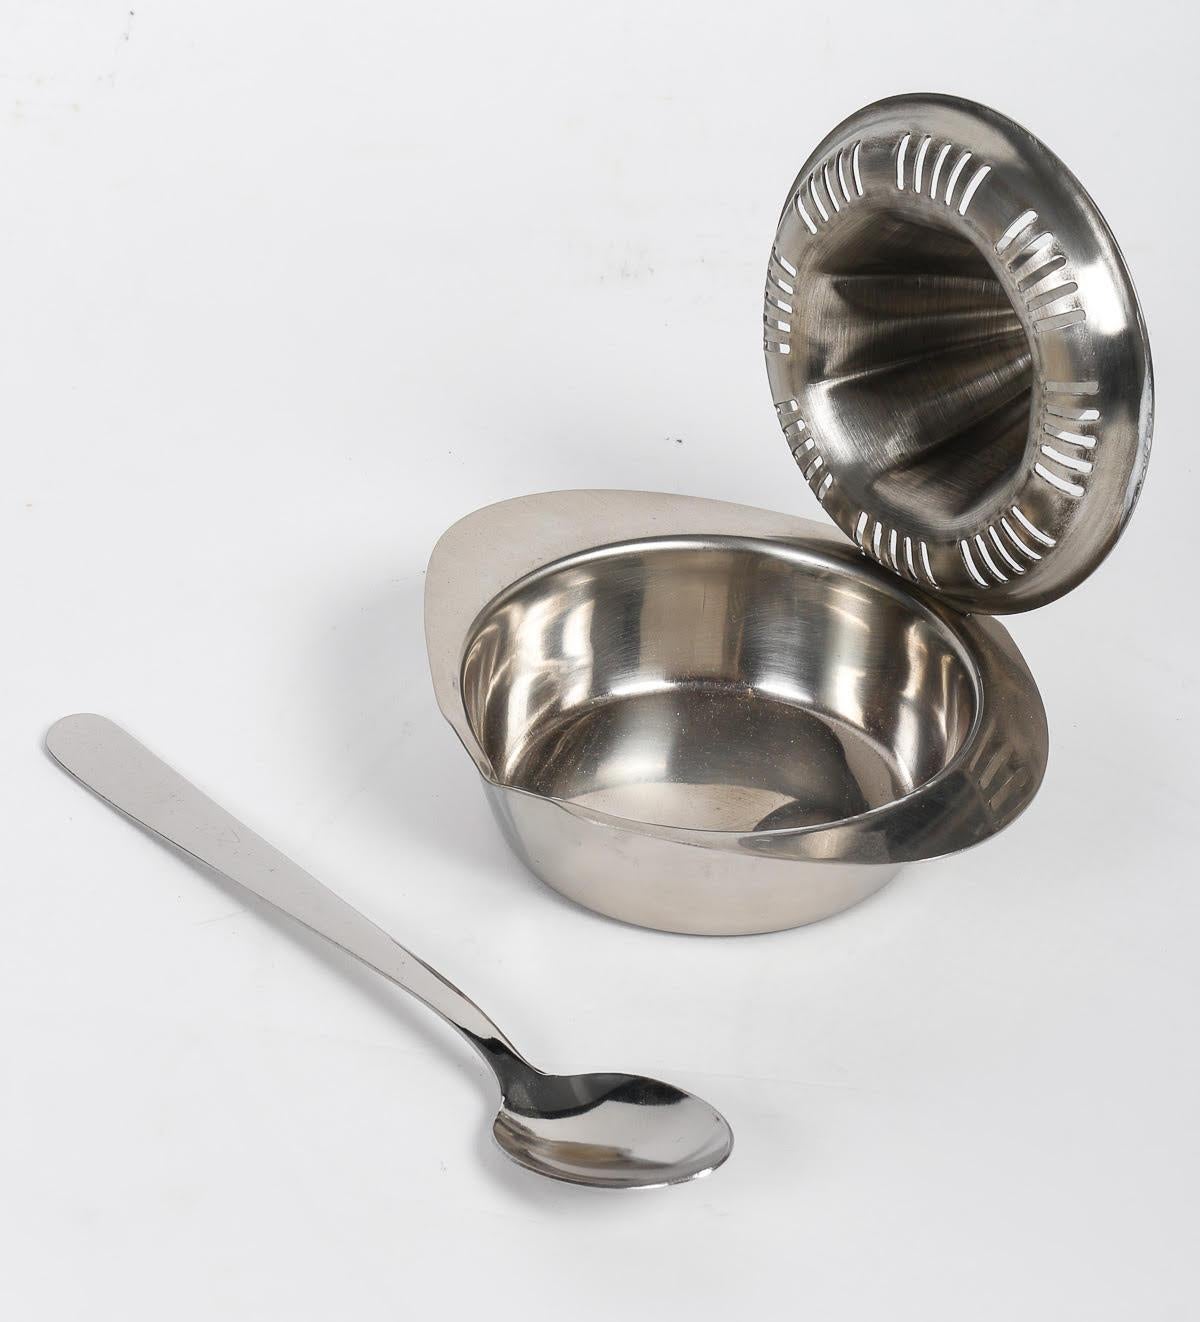 Mid-Century Modern 1960's Stainless Steel Lemon Squeezer, Letang & Remy, Paris. For Sale